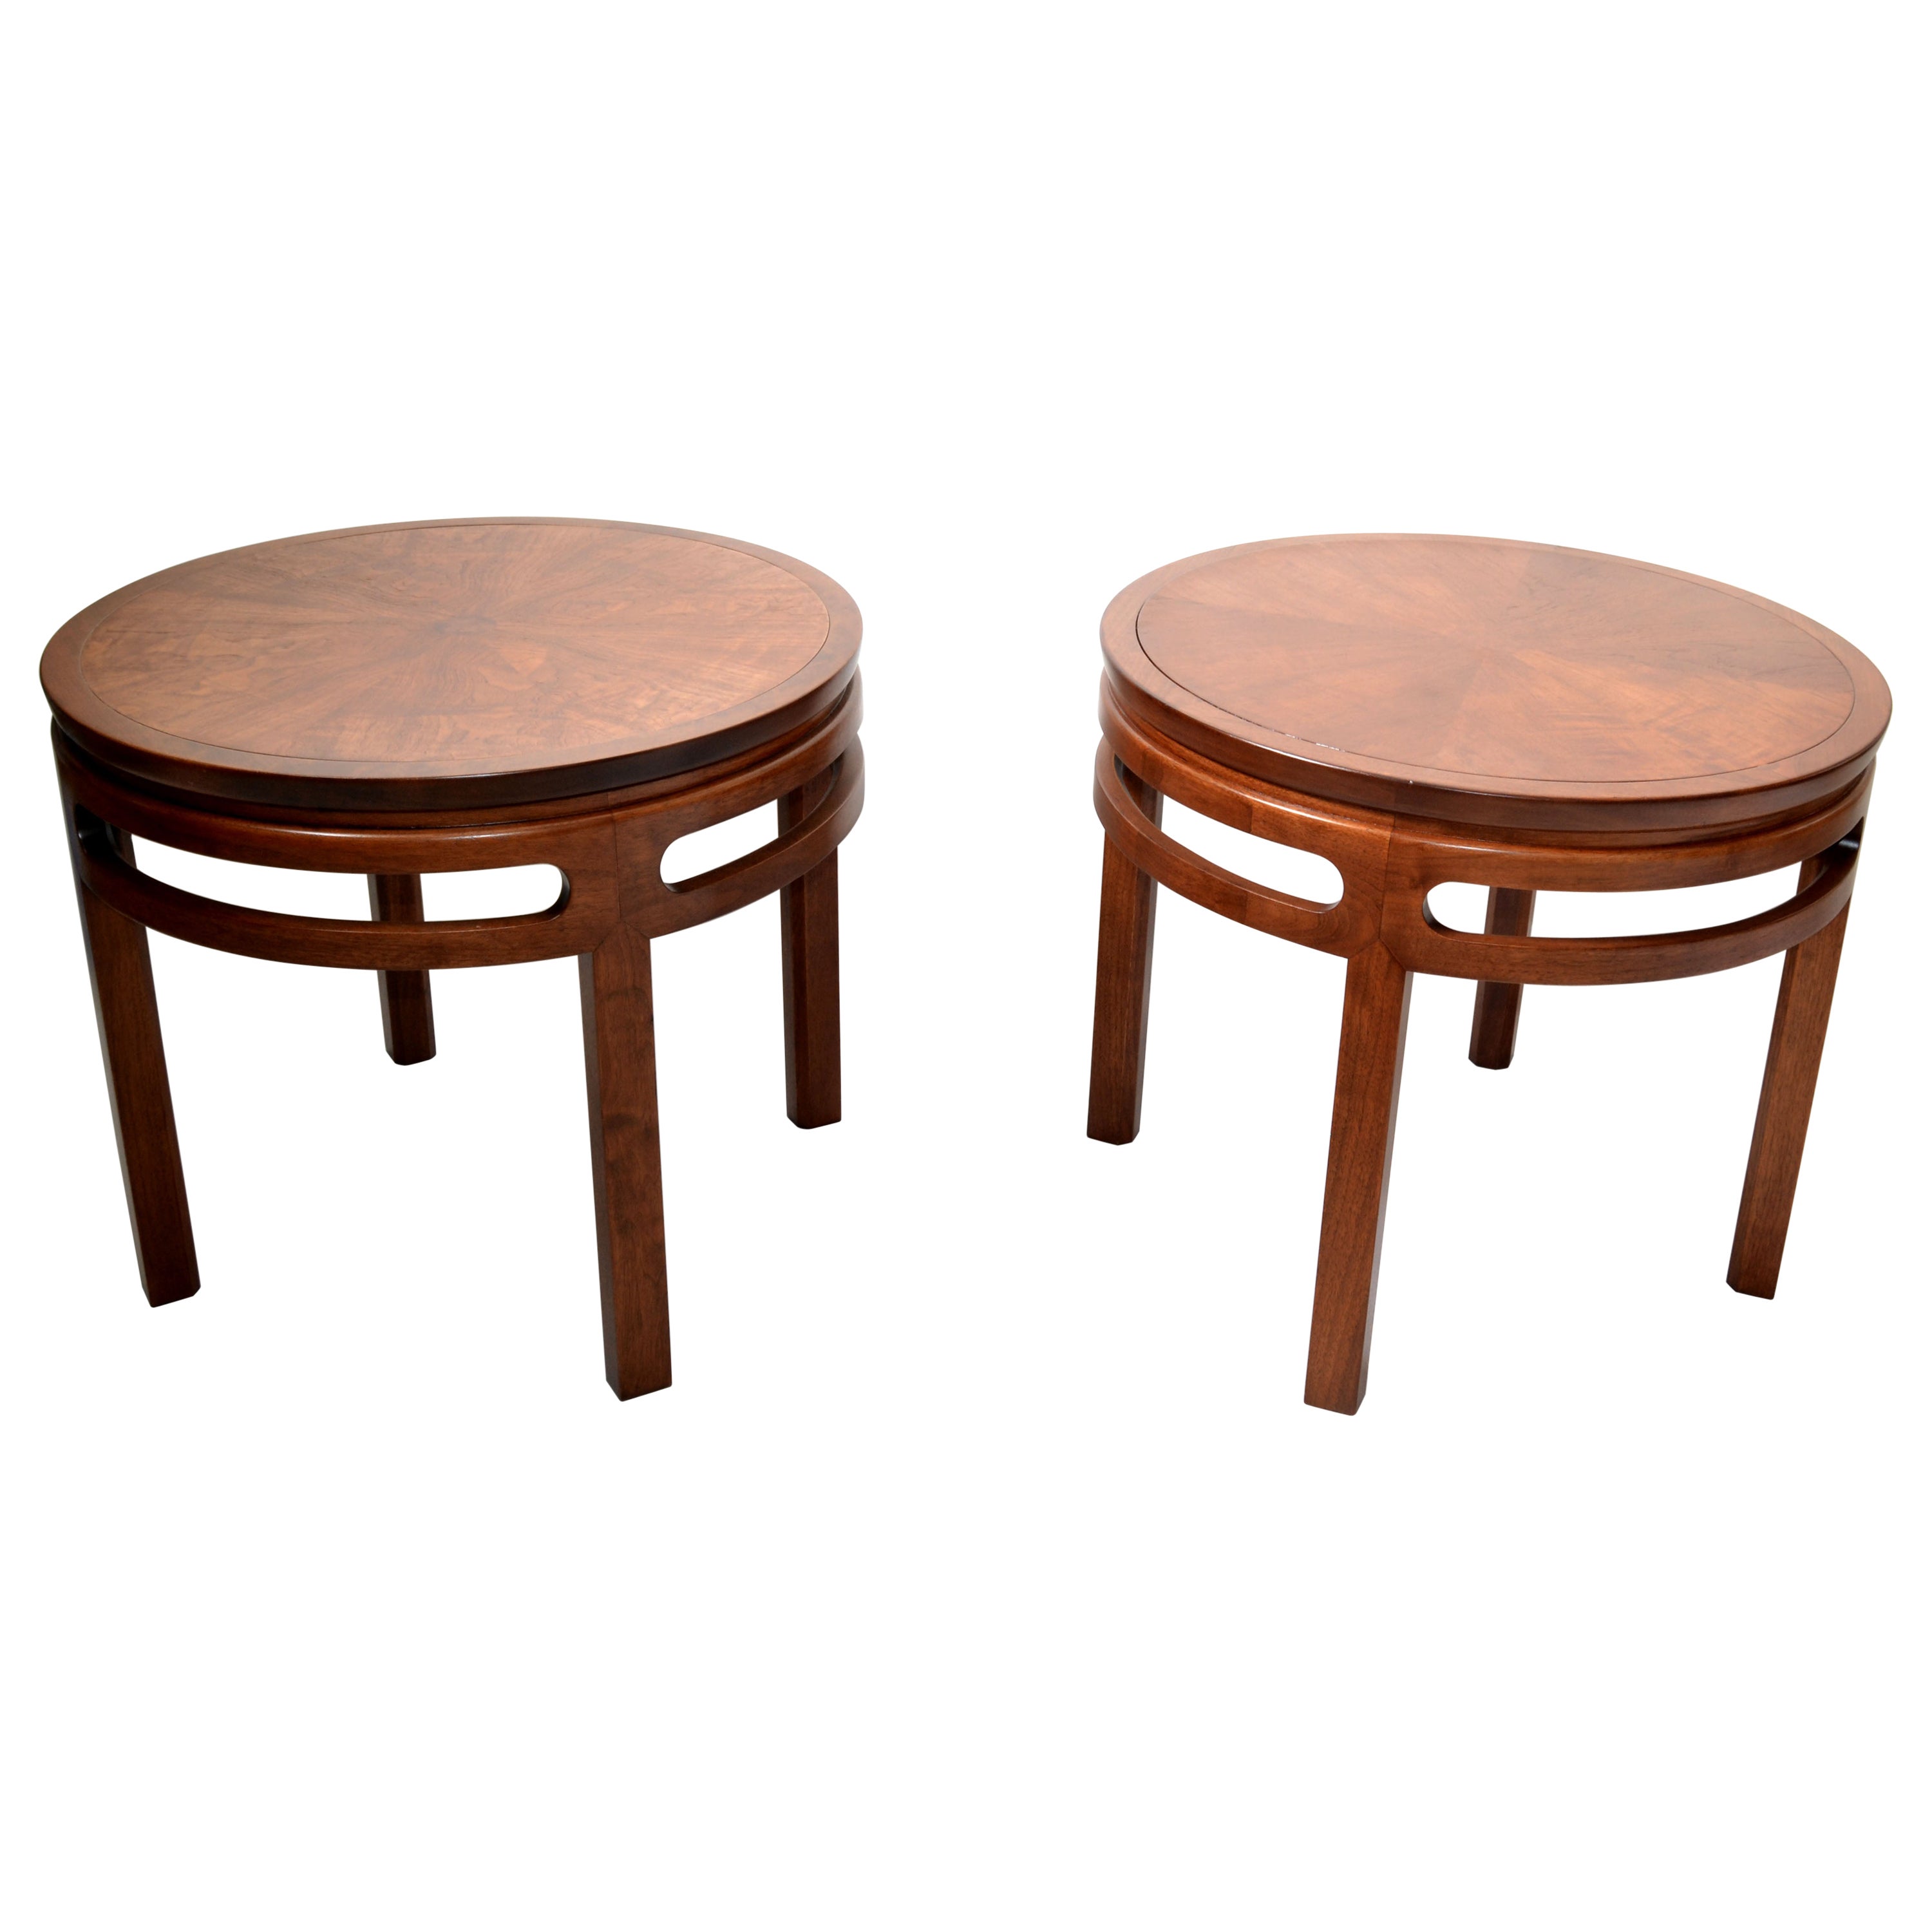 Asian Modern Far East Collection Round Table Michael Taylor Baker Furniture Pair For Sale